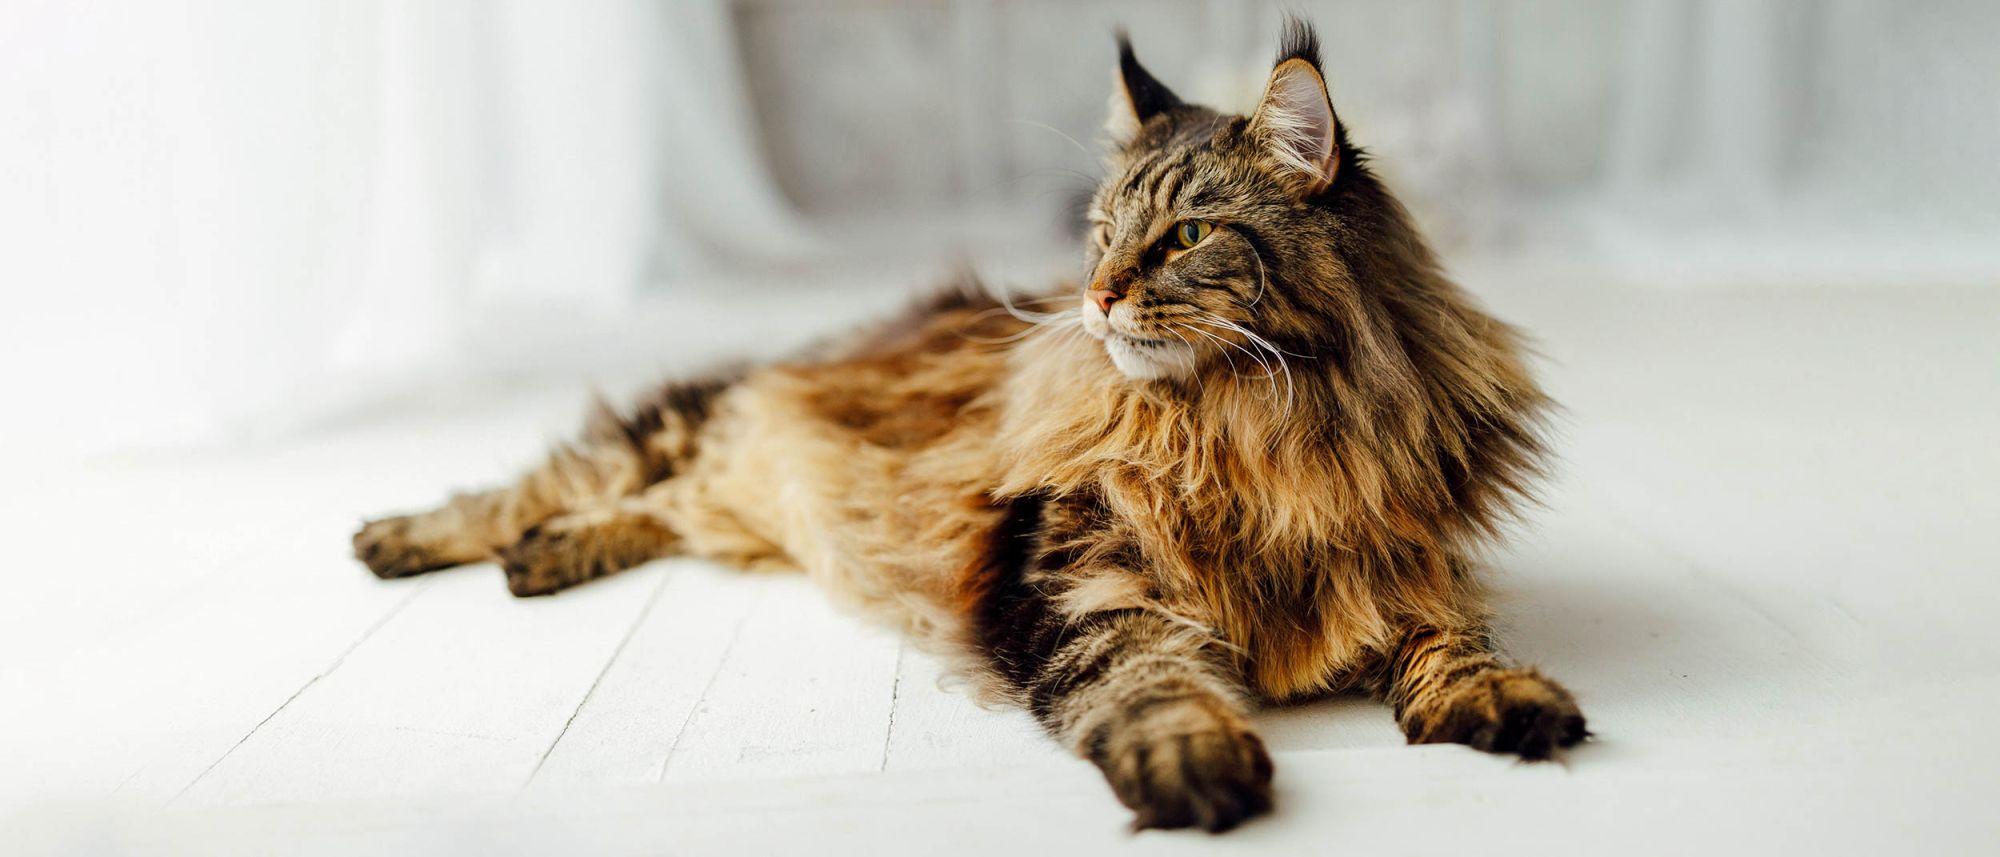 Adult Maine Coon cat lying down on wooden floor